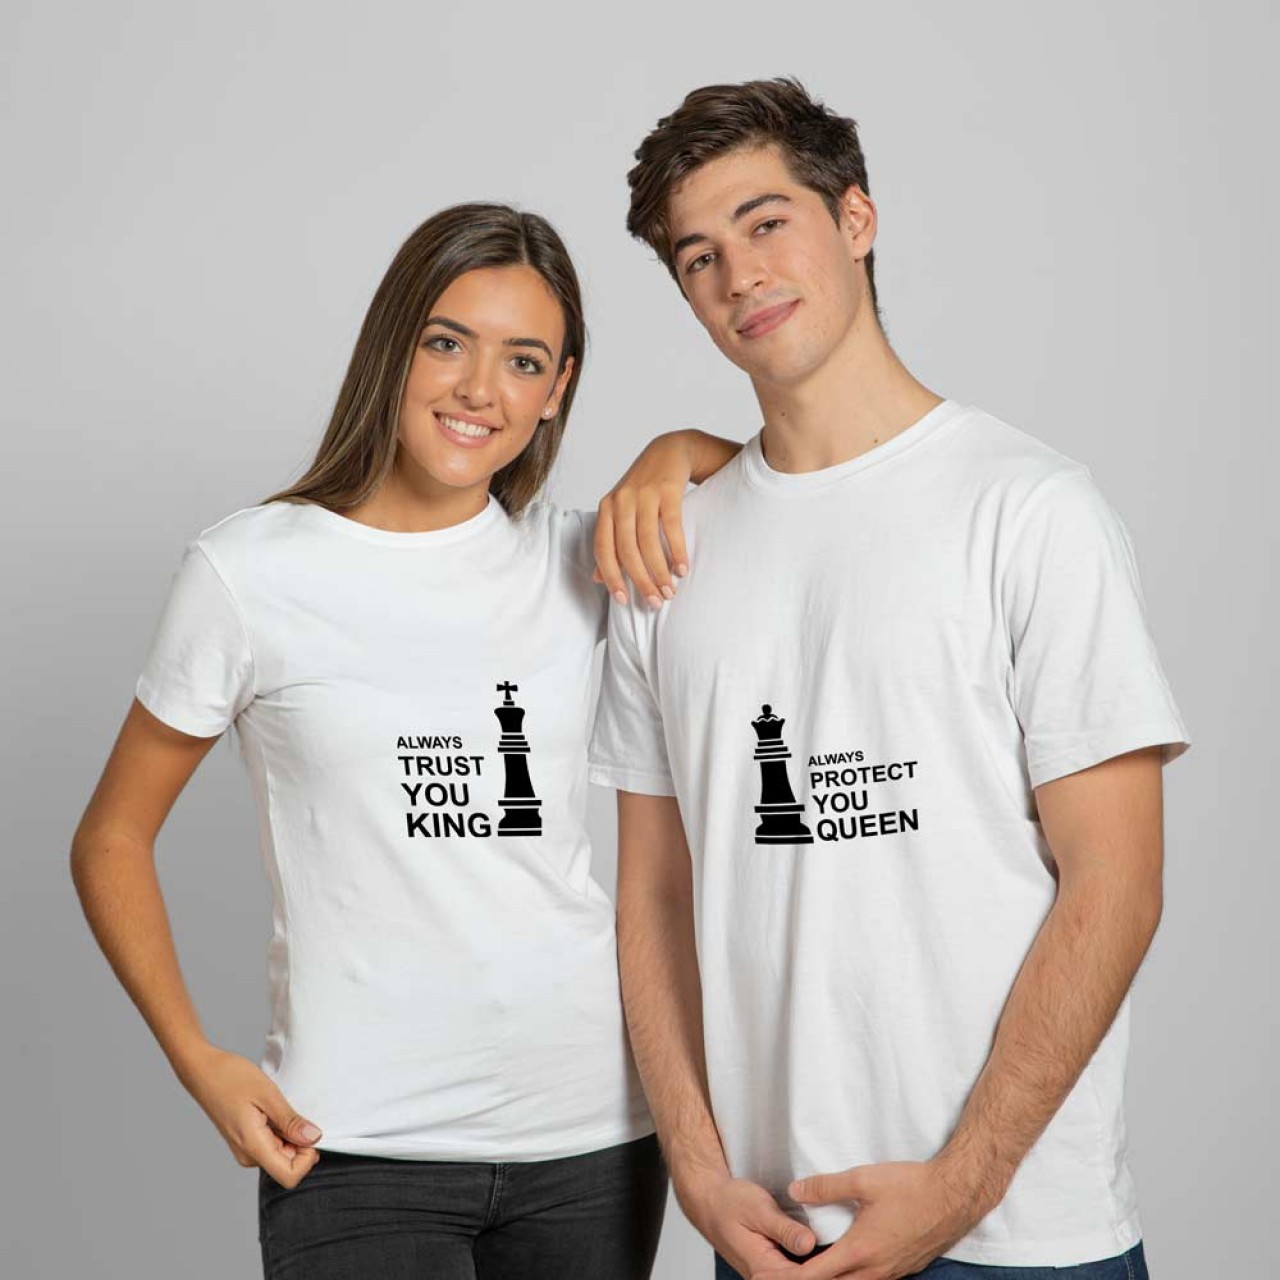 Always Trust & Protect King Queen Cotton T-Shirts For Couples